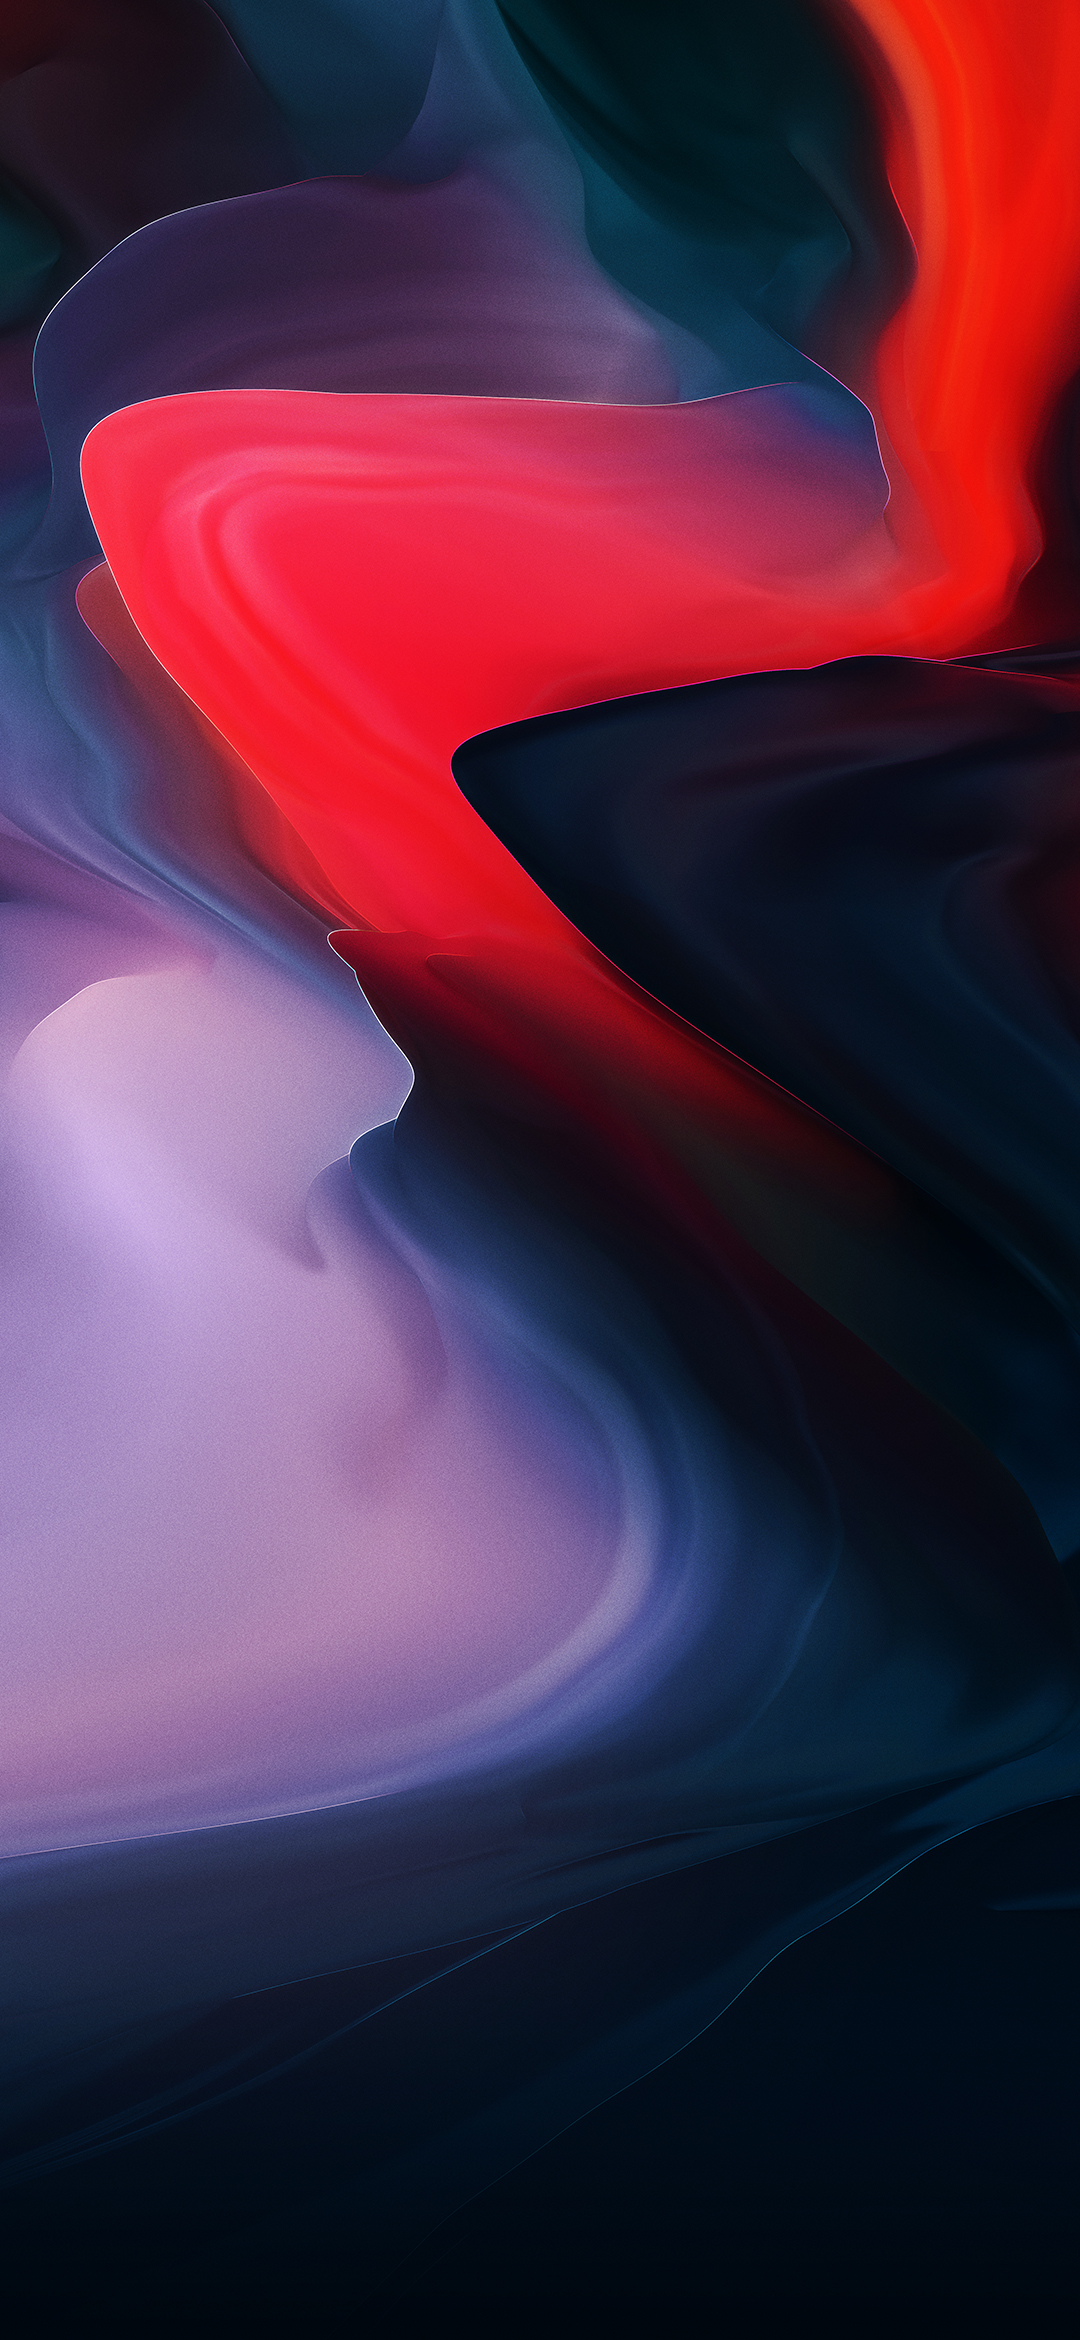 Download OnePlus 6T Wallpapers